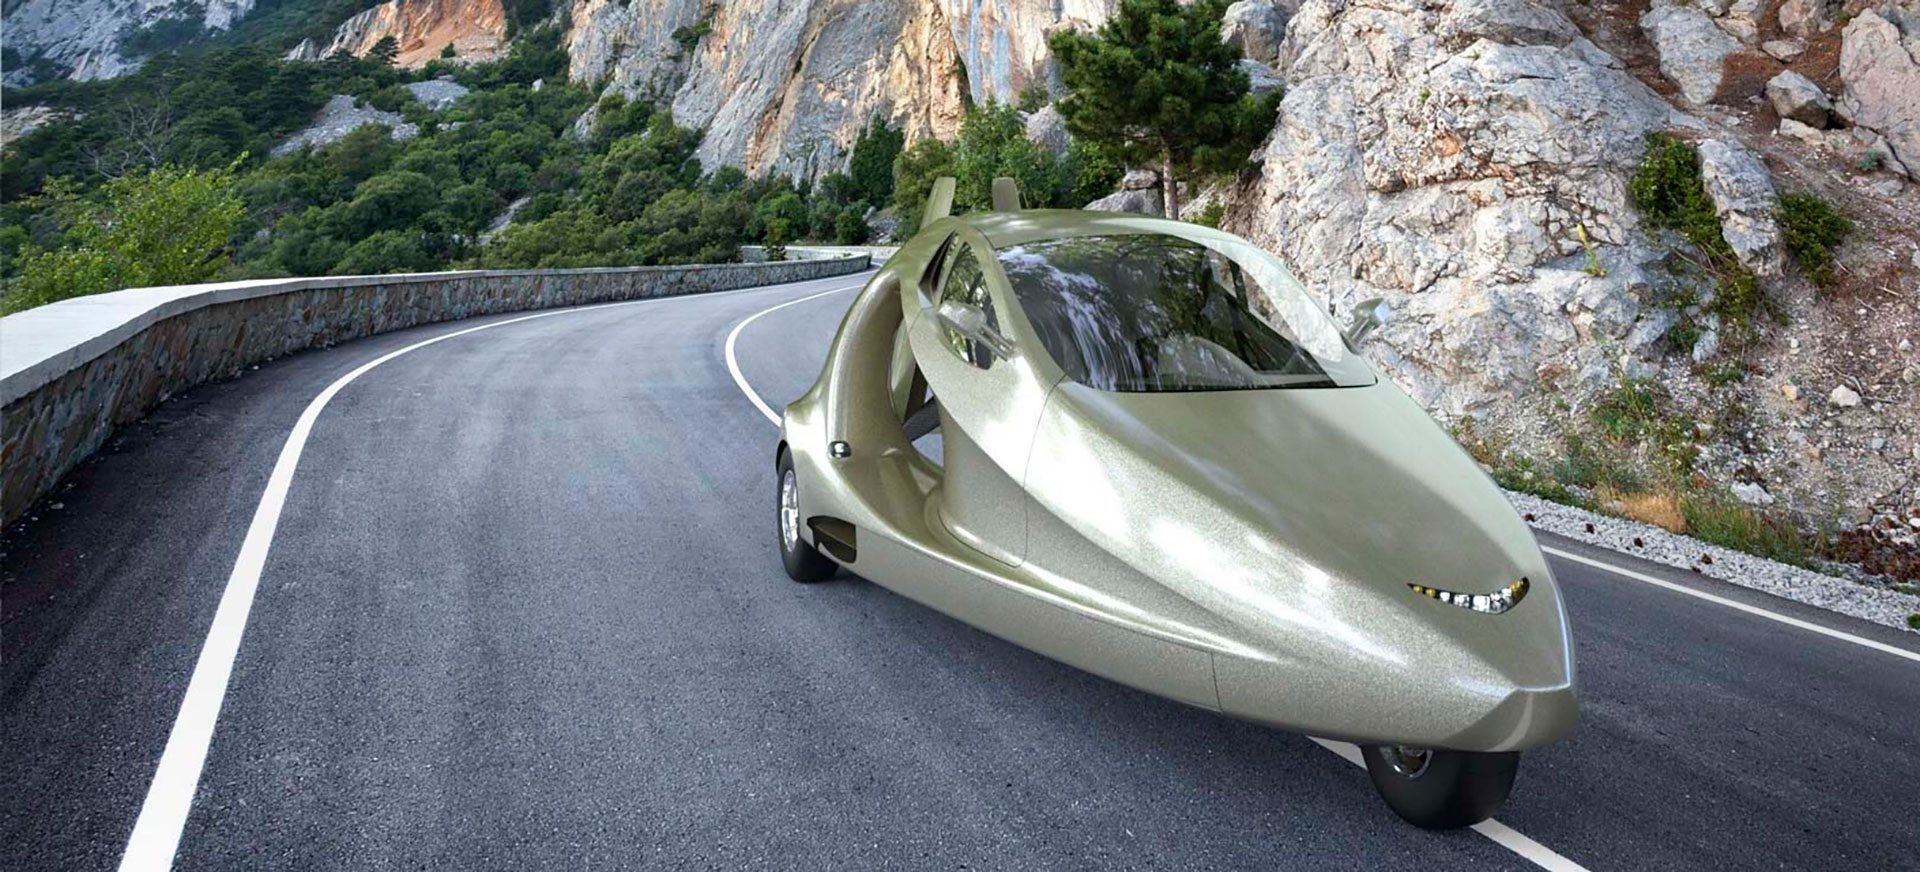 The flying car could work both on the streets and in the airspace